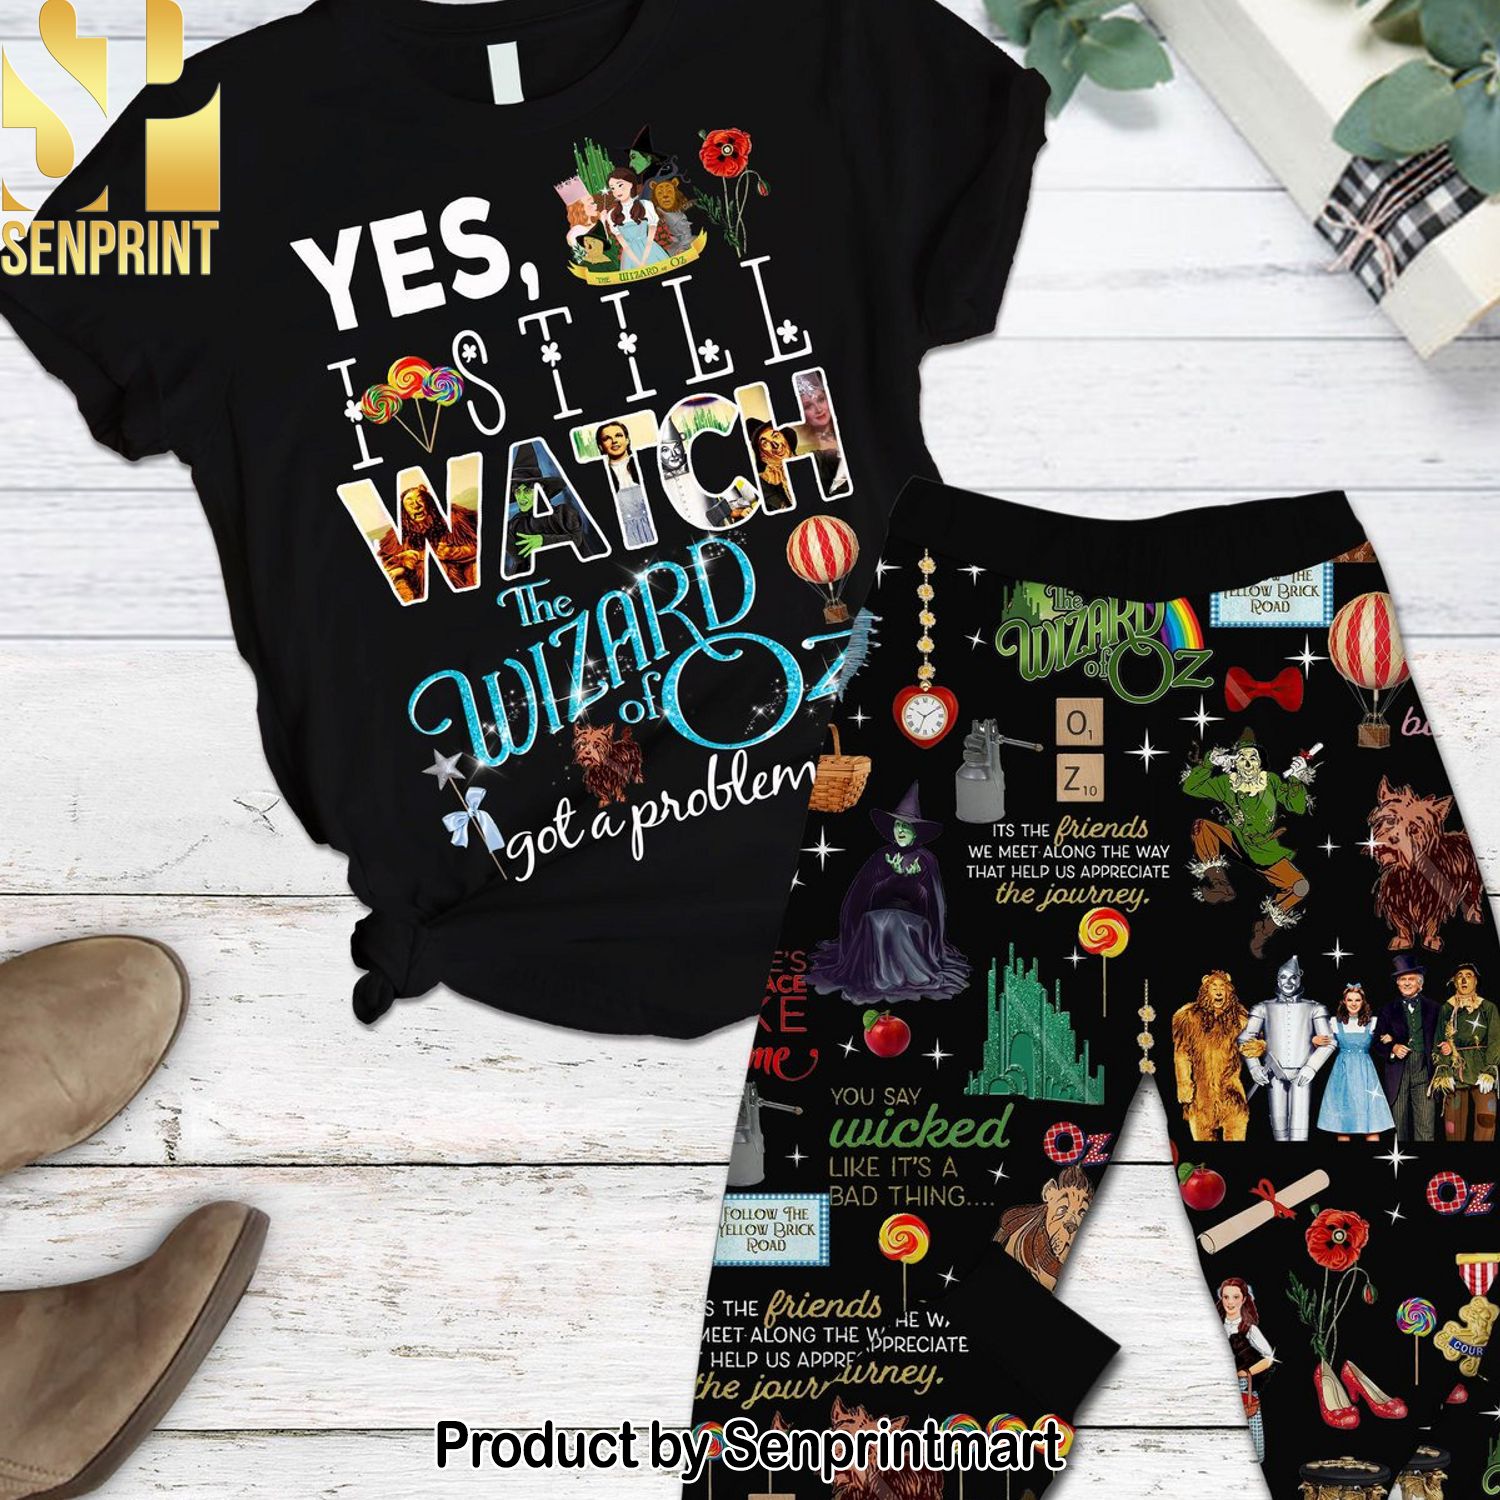 Oz the Great and Powerful Casual All Over Printed Pajama Sets